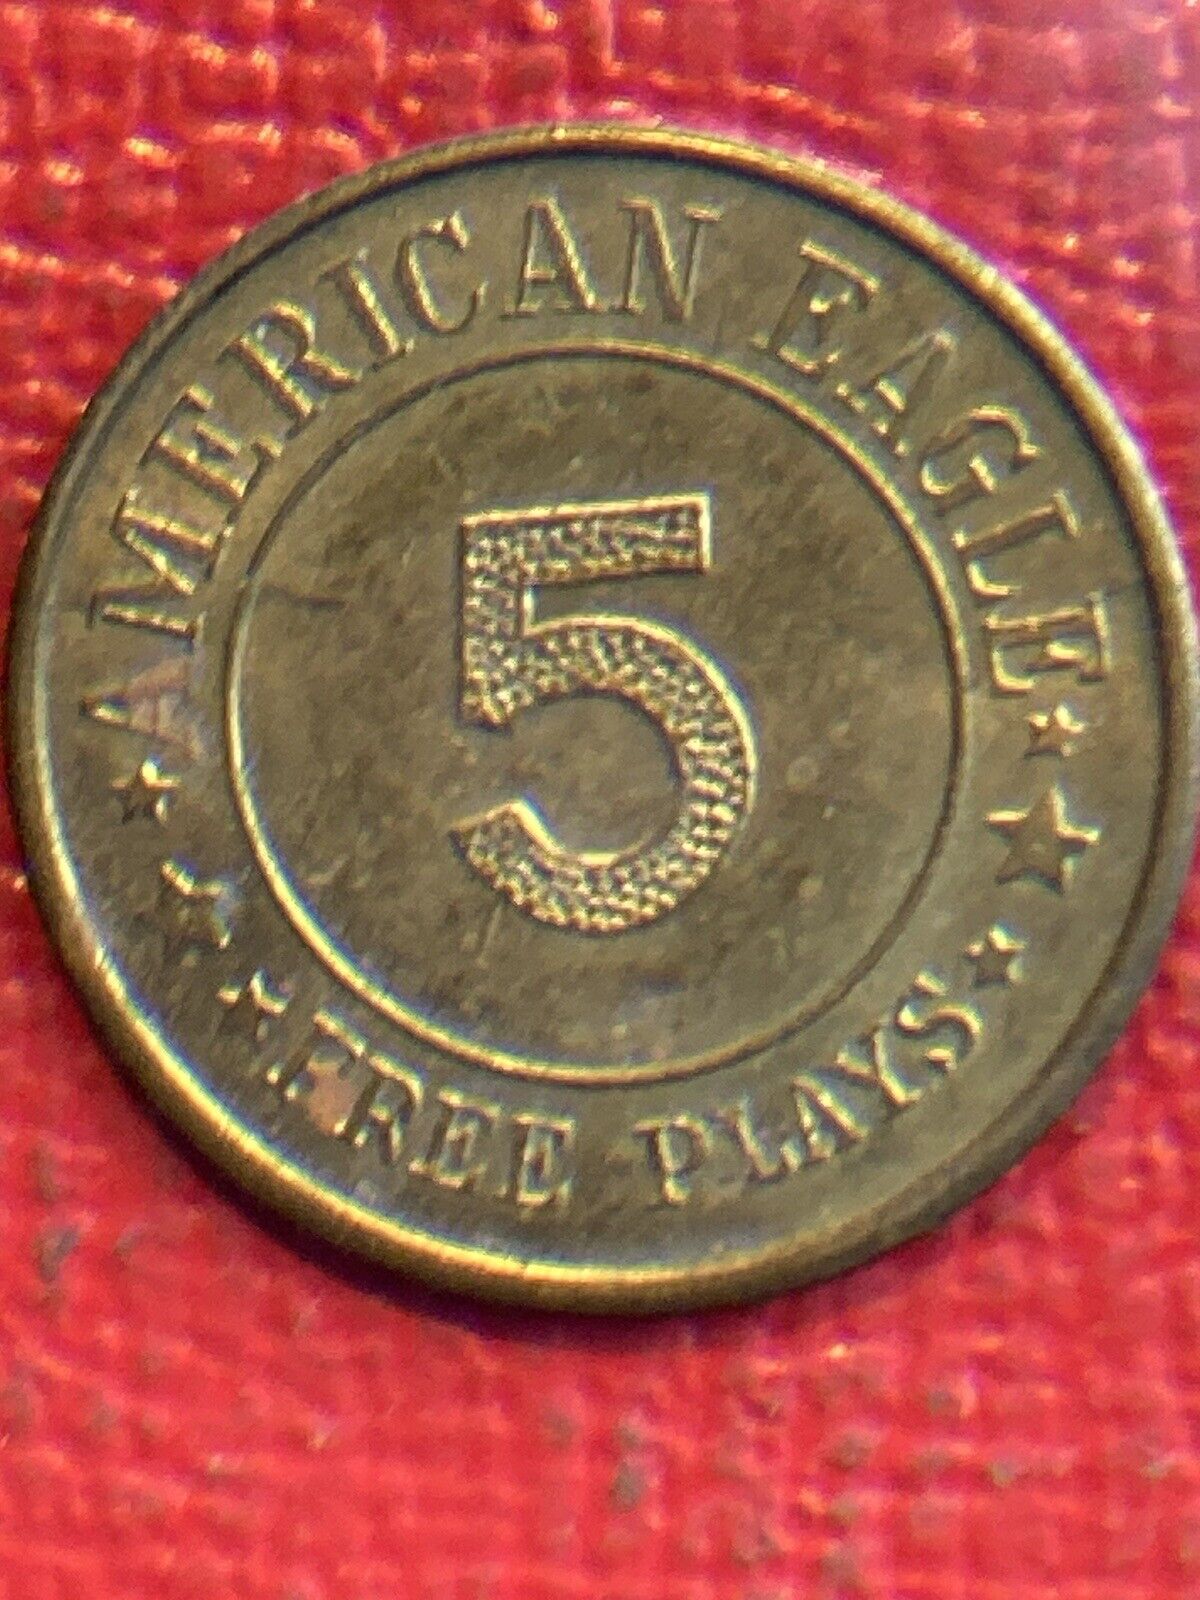 VINTAGE AMERICAN EAGLE 5 FREE PLAYS TOKEN - VERY NICE AND VERY SCARCE